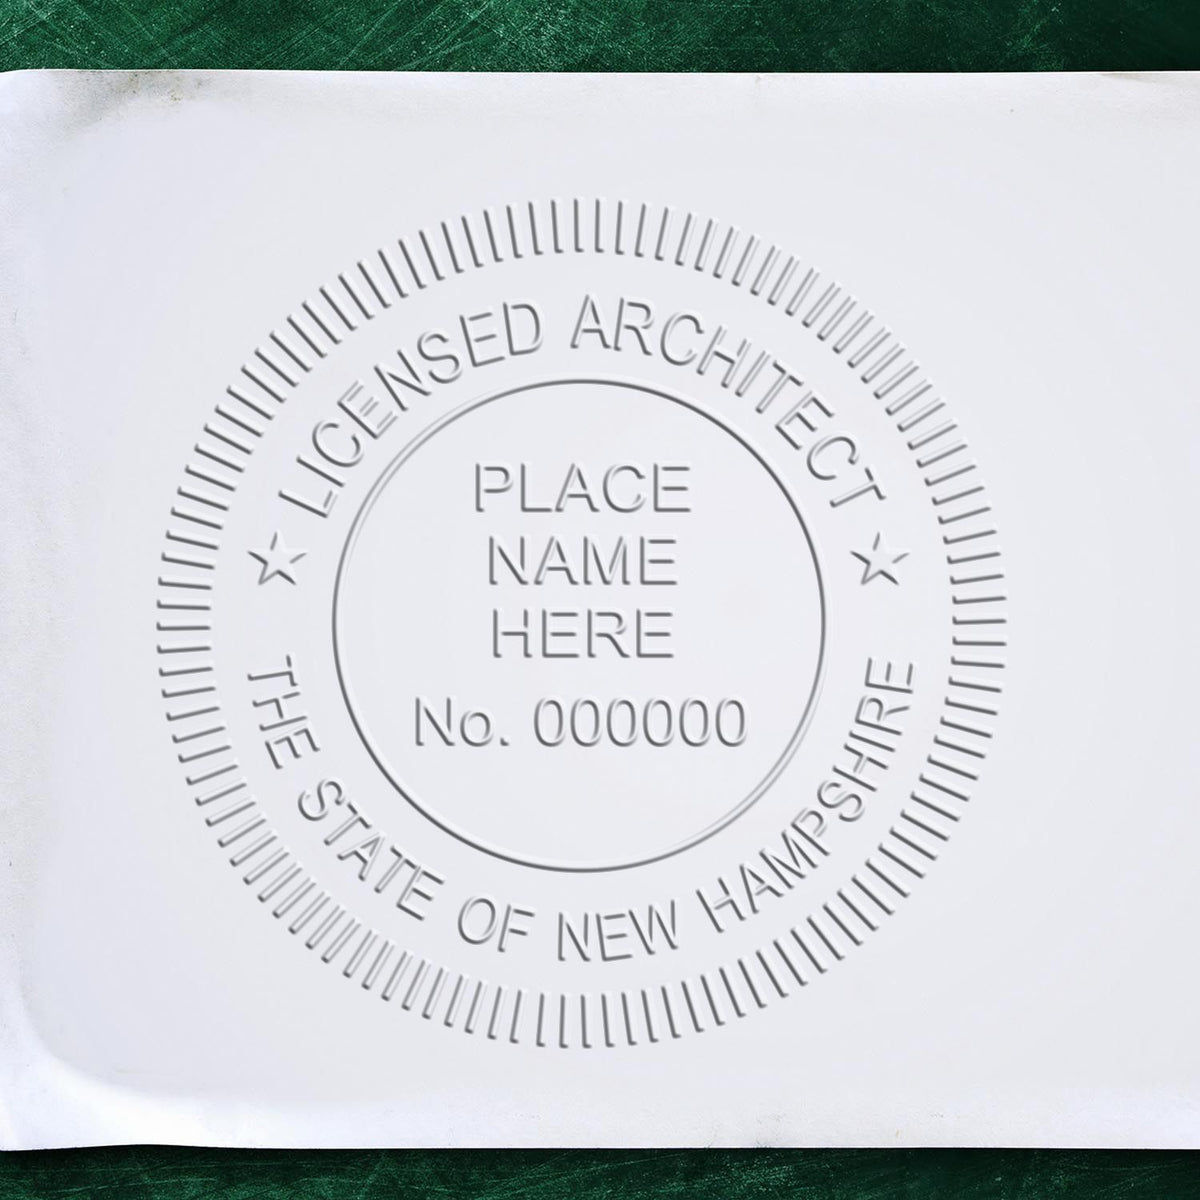 A photograph of the Hybrid New Hampshire Architect Seal stamp impression reveals a vivid, professional image of the on paper.